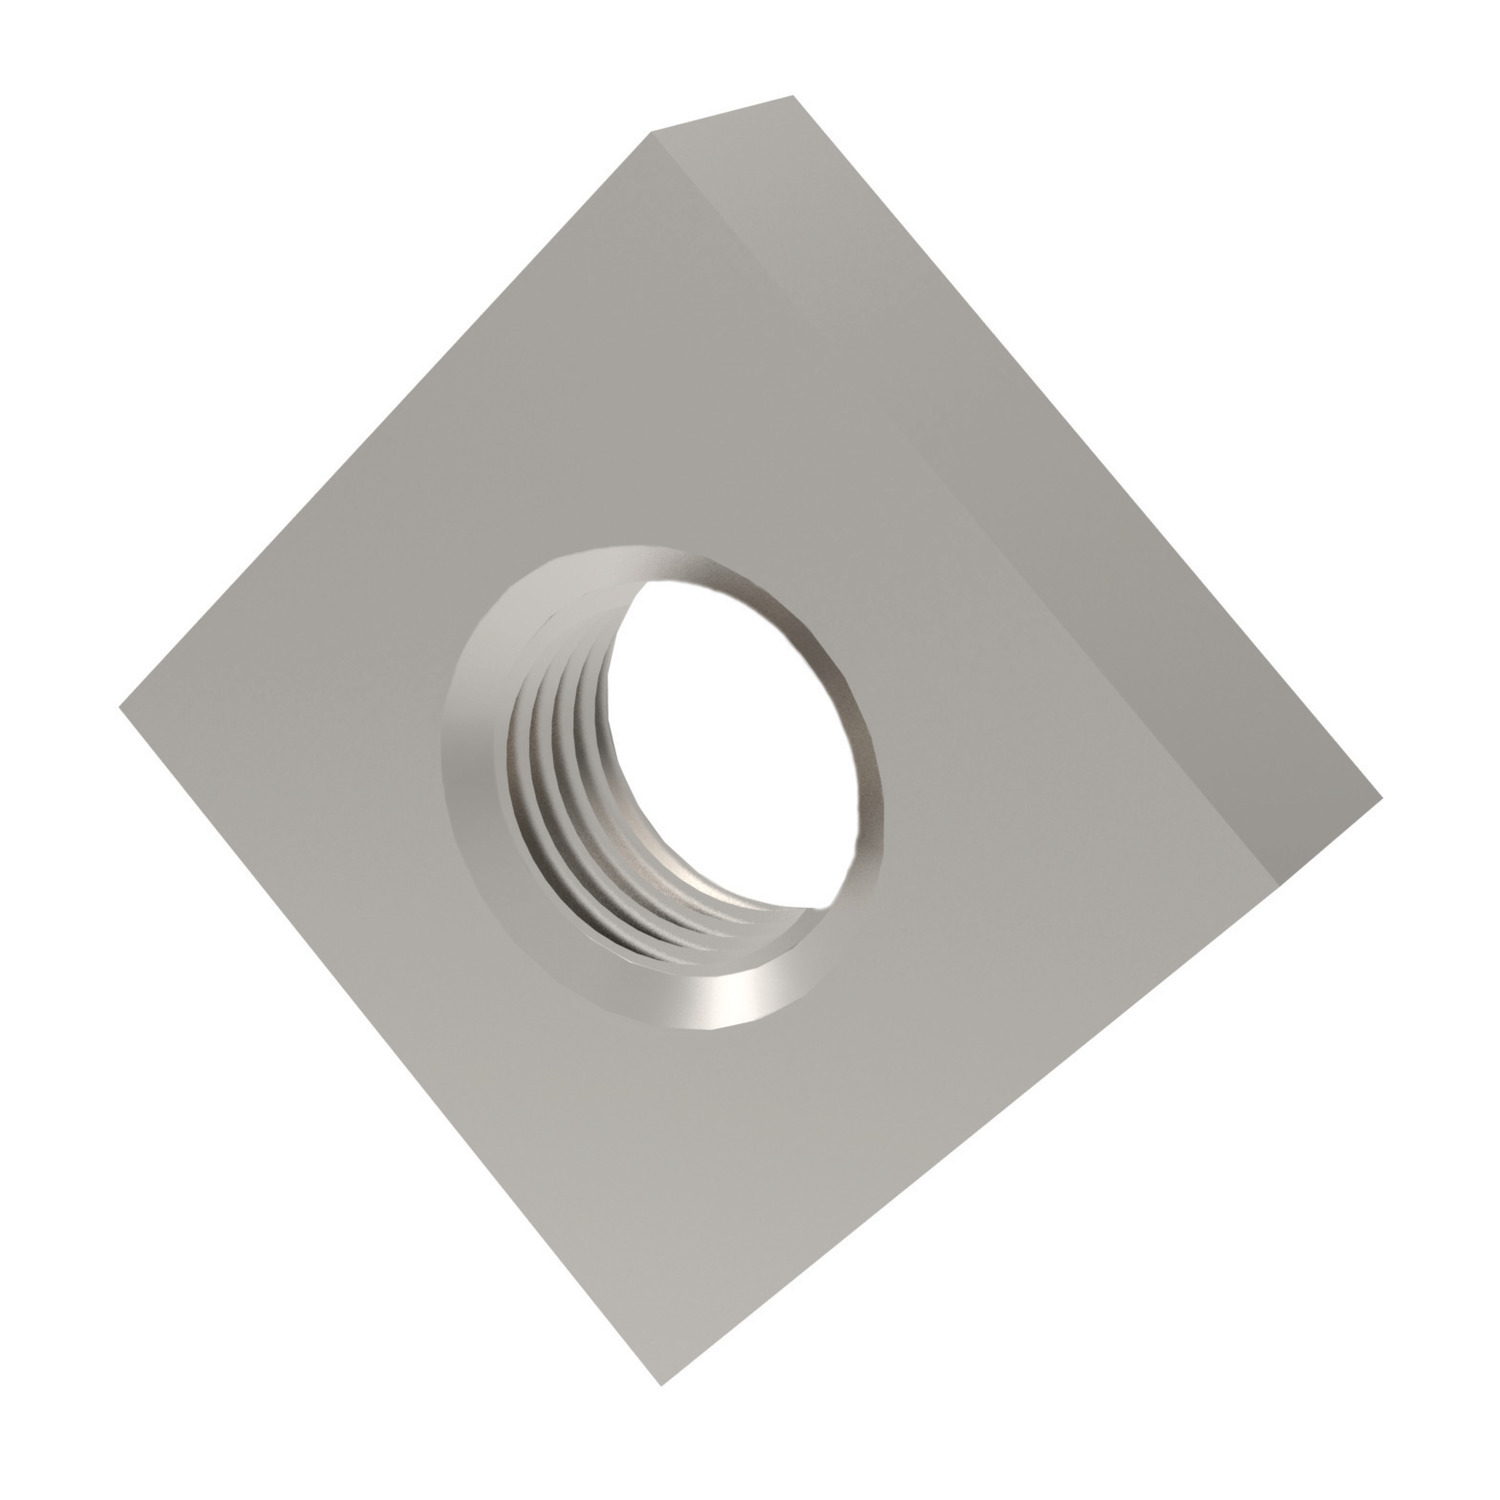 Square Nuts A2 stainless steel. To DIN 562. Standard metric coarse threads.